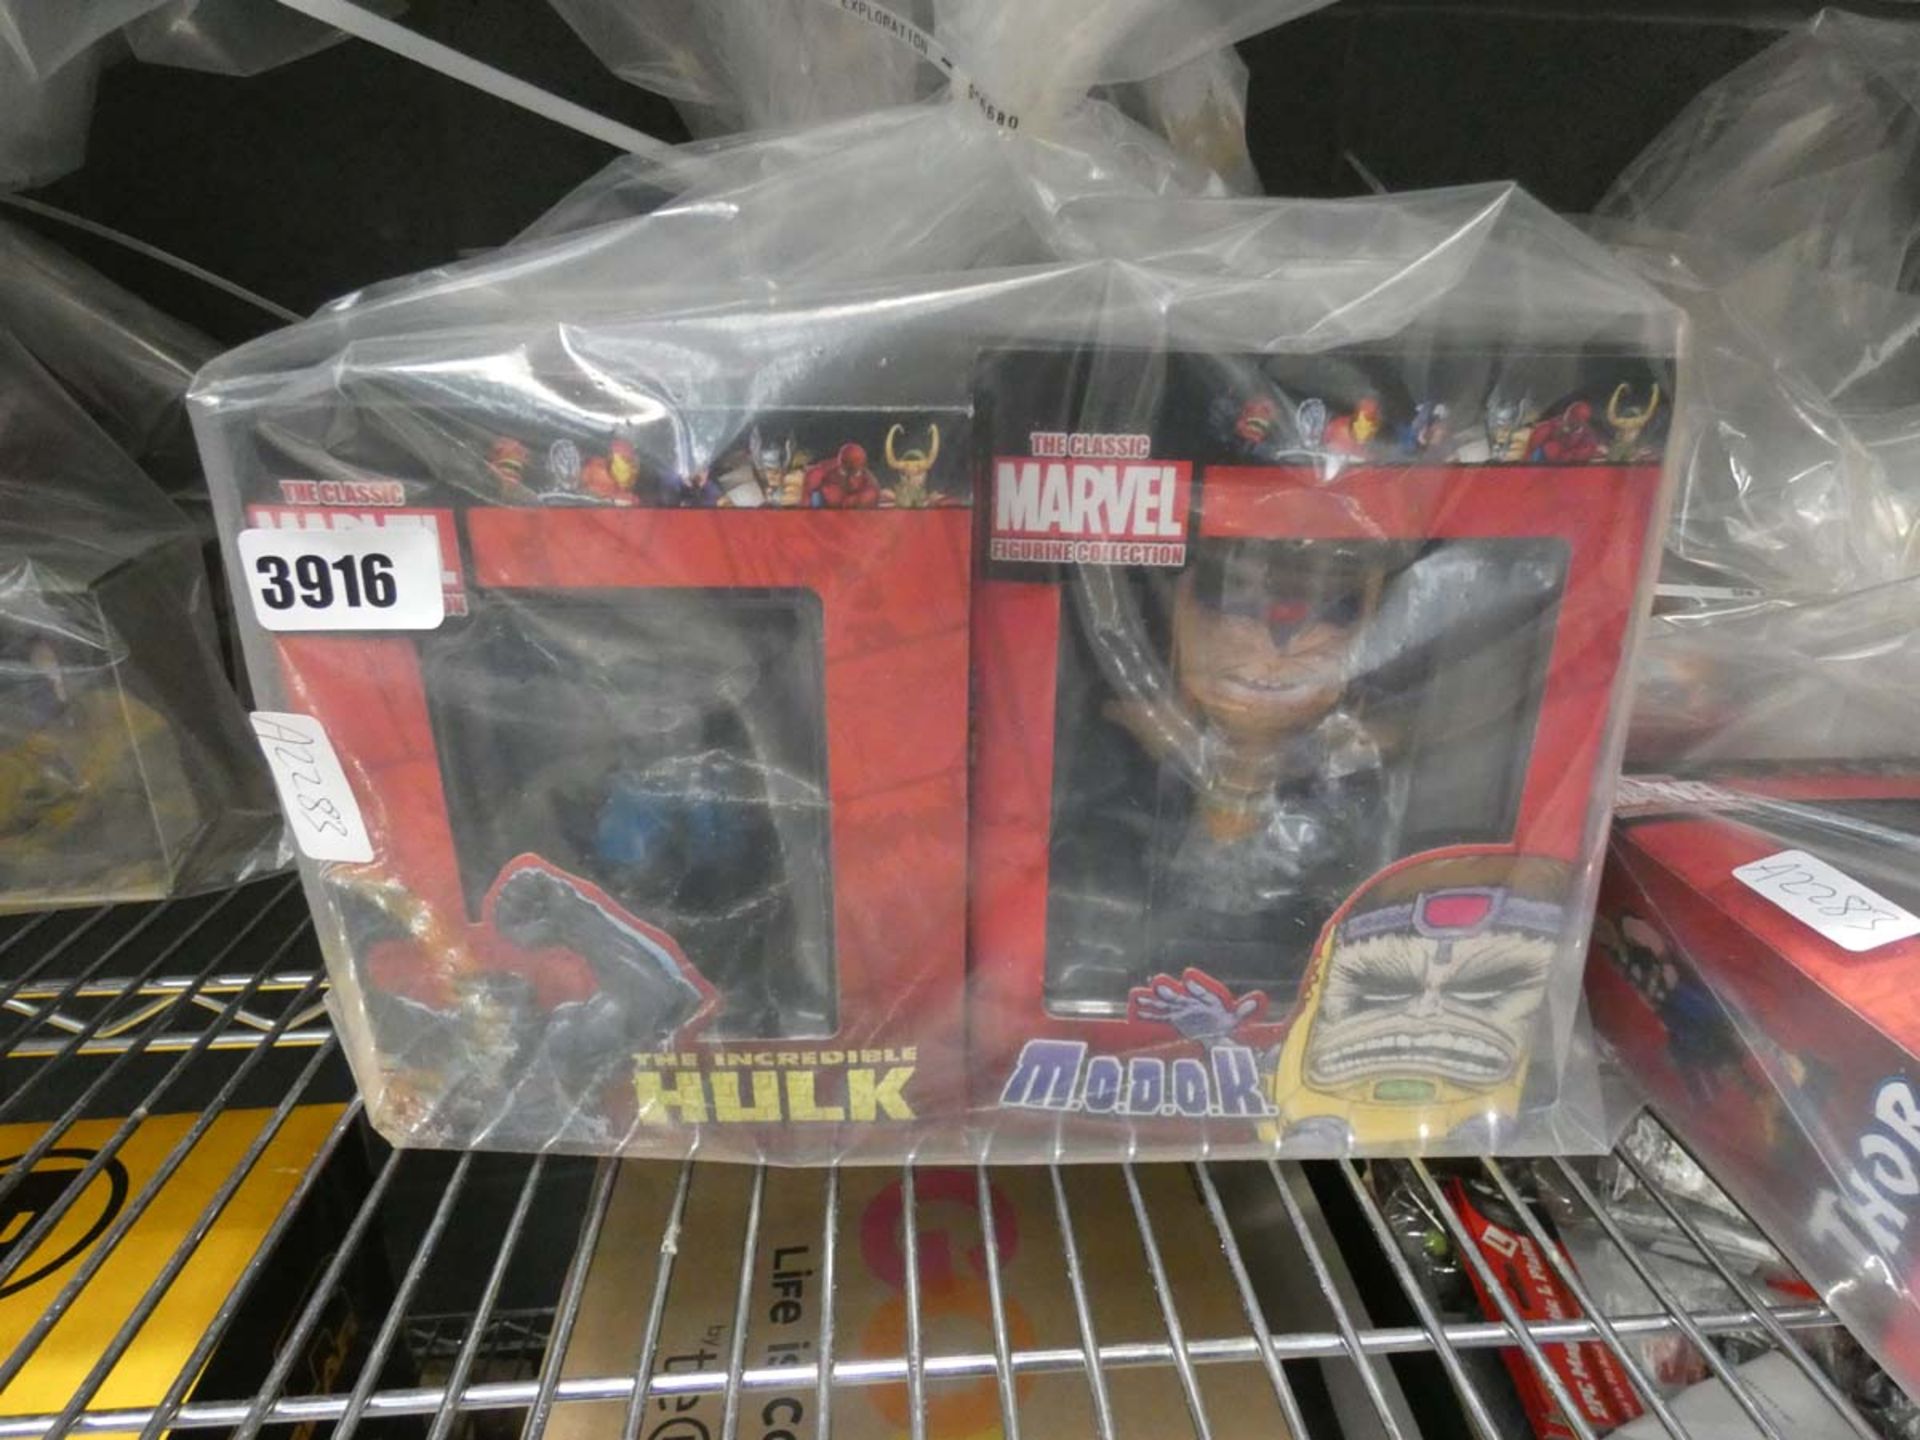 Bag containing the Classic Marvel Incredible Hulk figurine plus the Classic Marvel Modok figurine